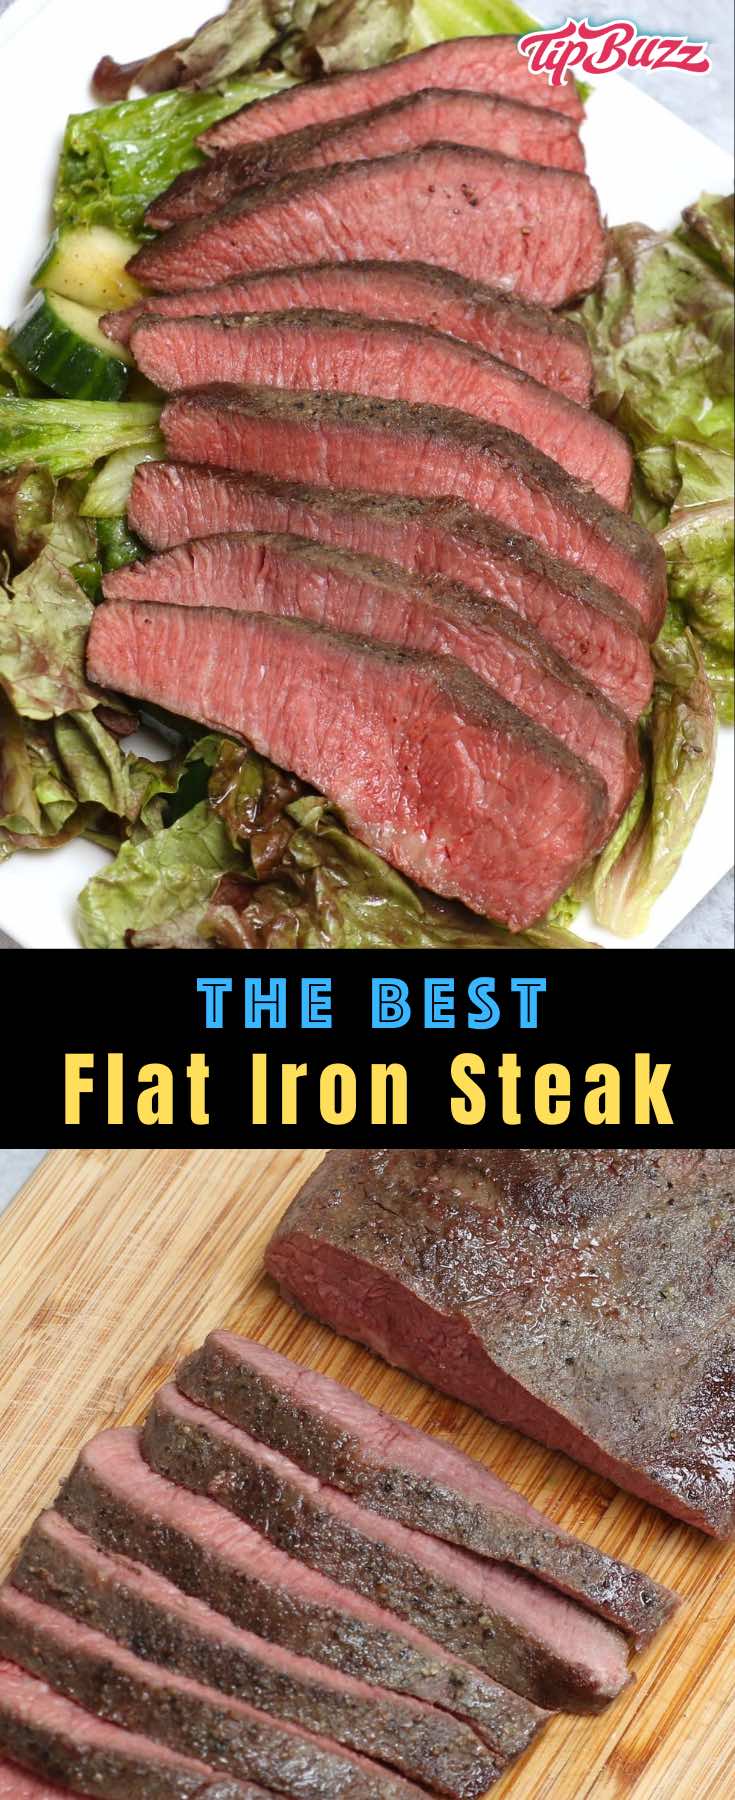 This flat iron steak is pan-seared to perfection with garlic and herbs to make a mouthwatering steak dinner that's affordable and easy to make in just 15 minutes! #flatironsteak #tipbuzz